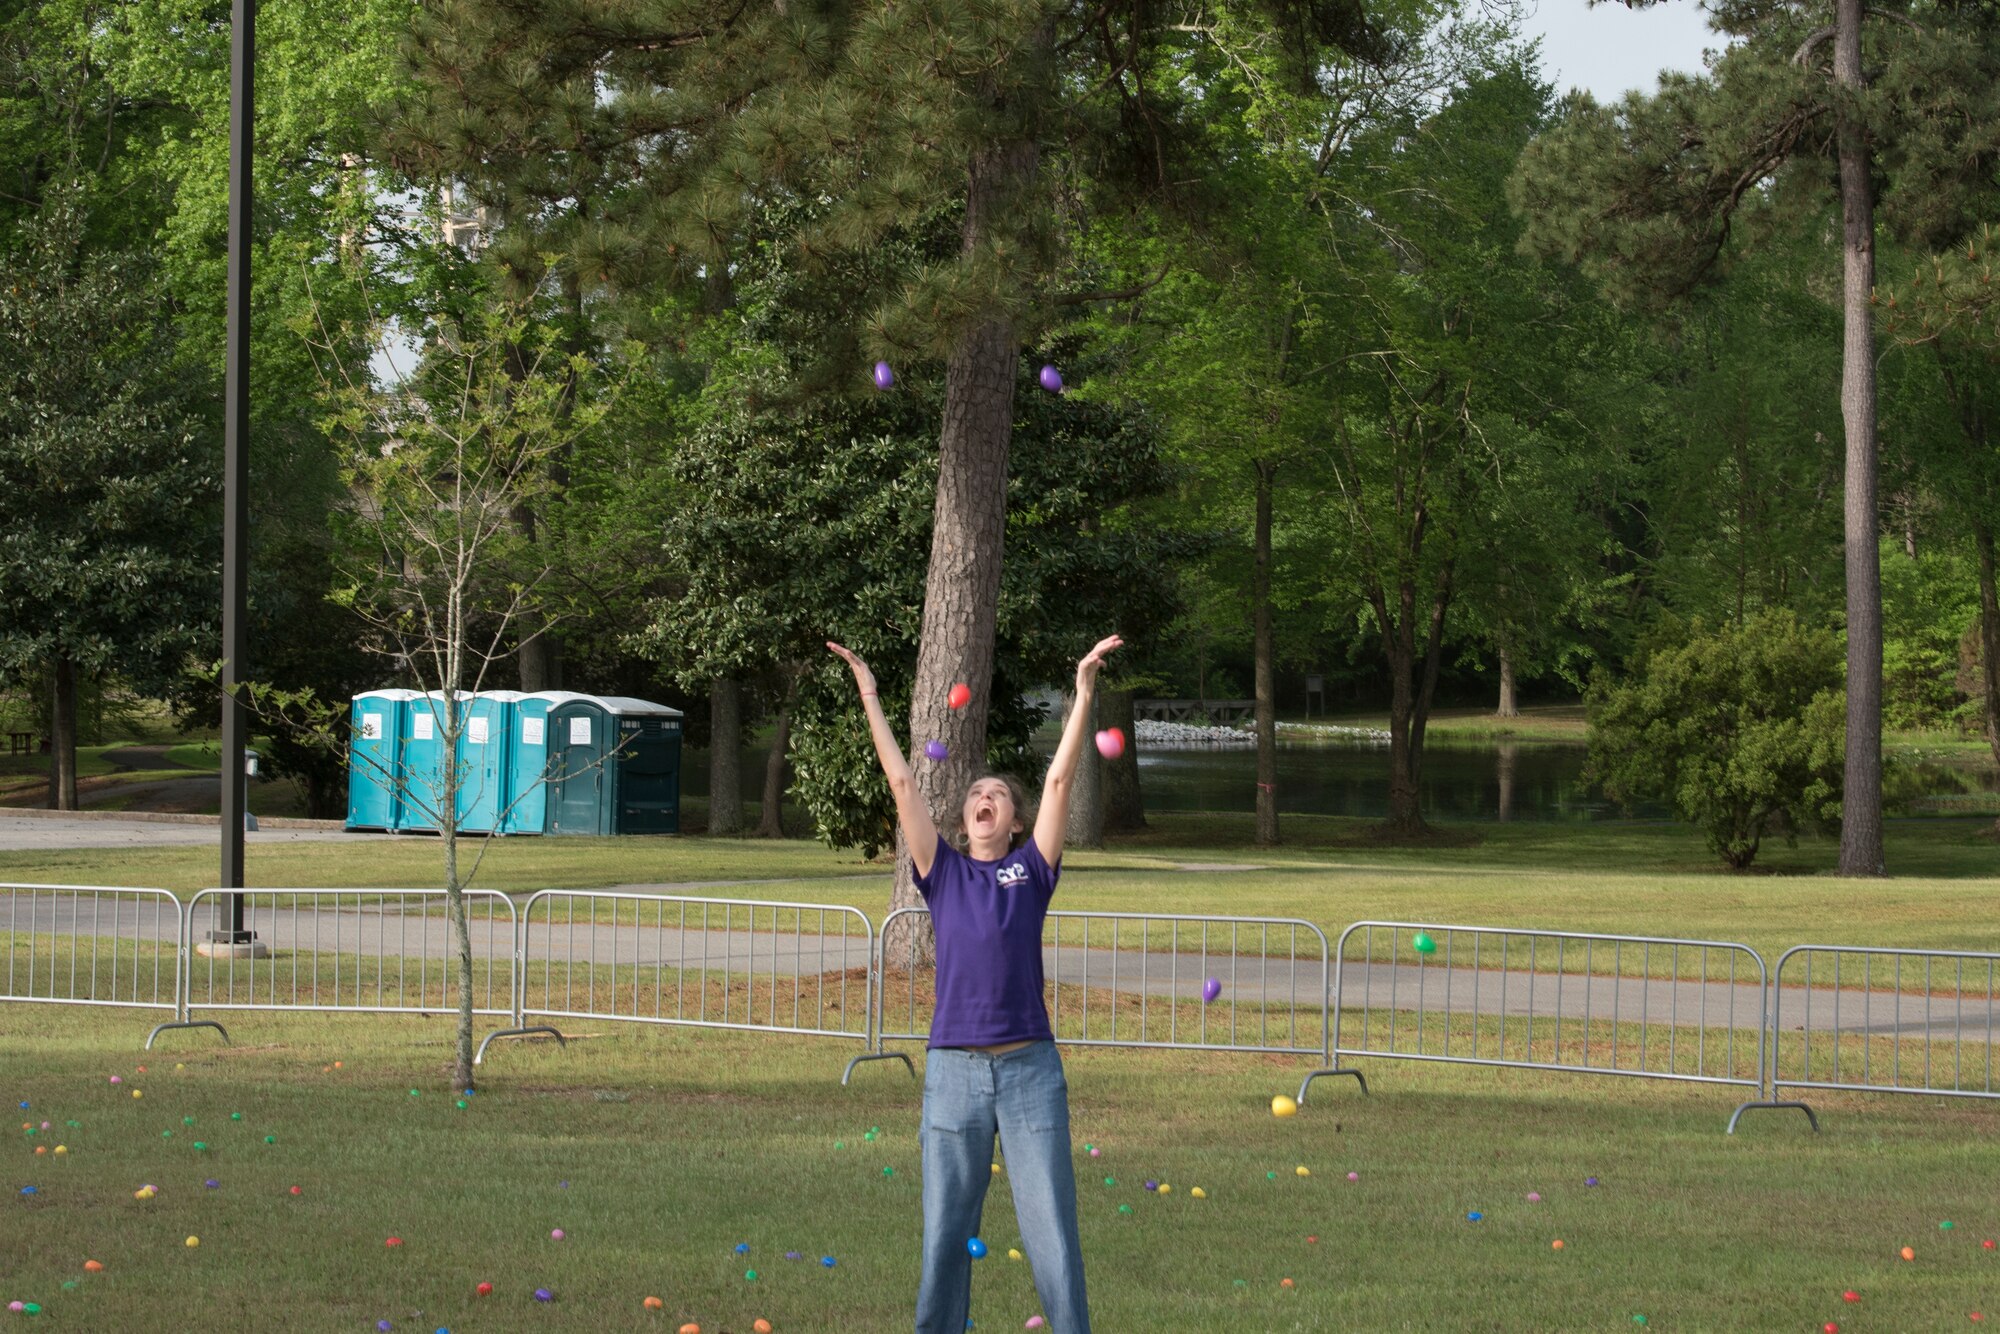 Deborah MacQueen, the 20th Force Support Squadron director of the Child and Youth Program throws Easter eggs in the air to disperse the eggs throughout the fenced in egg hunting area on Shaw Air Force Base, SC, April 13, 2019.